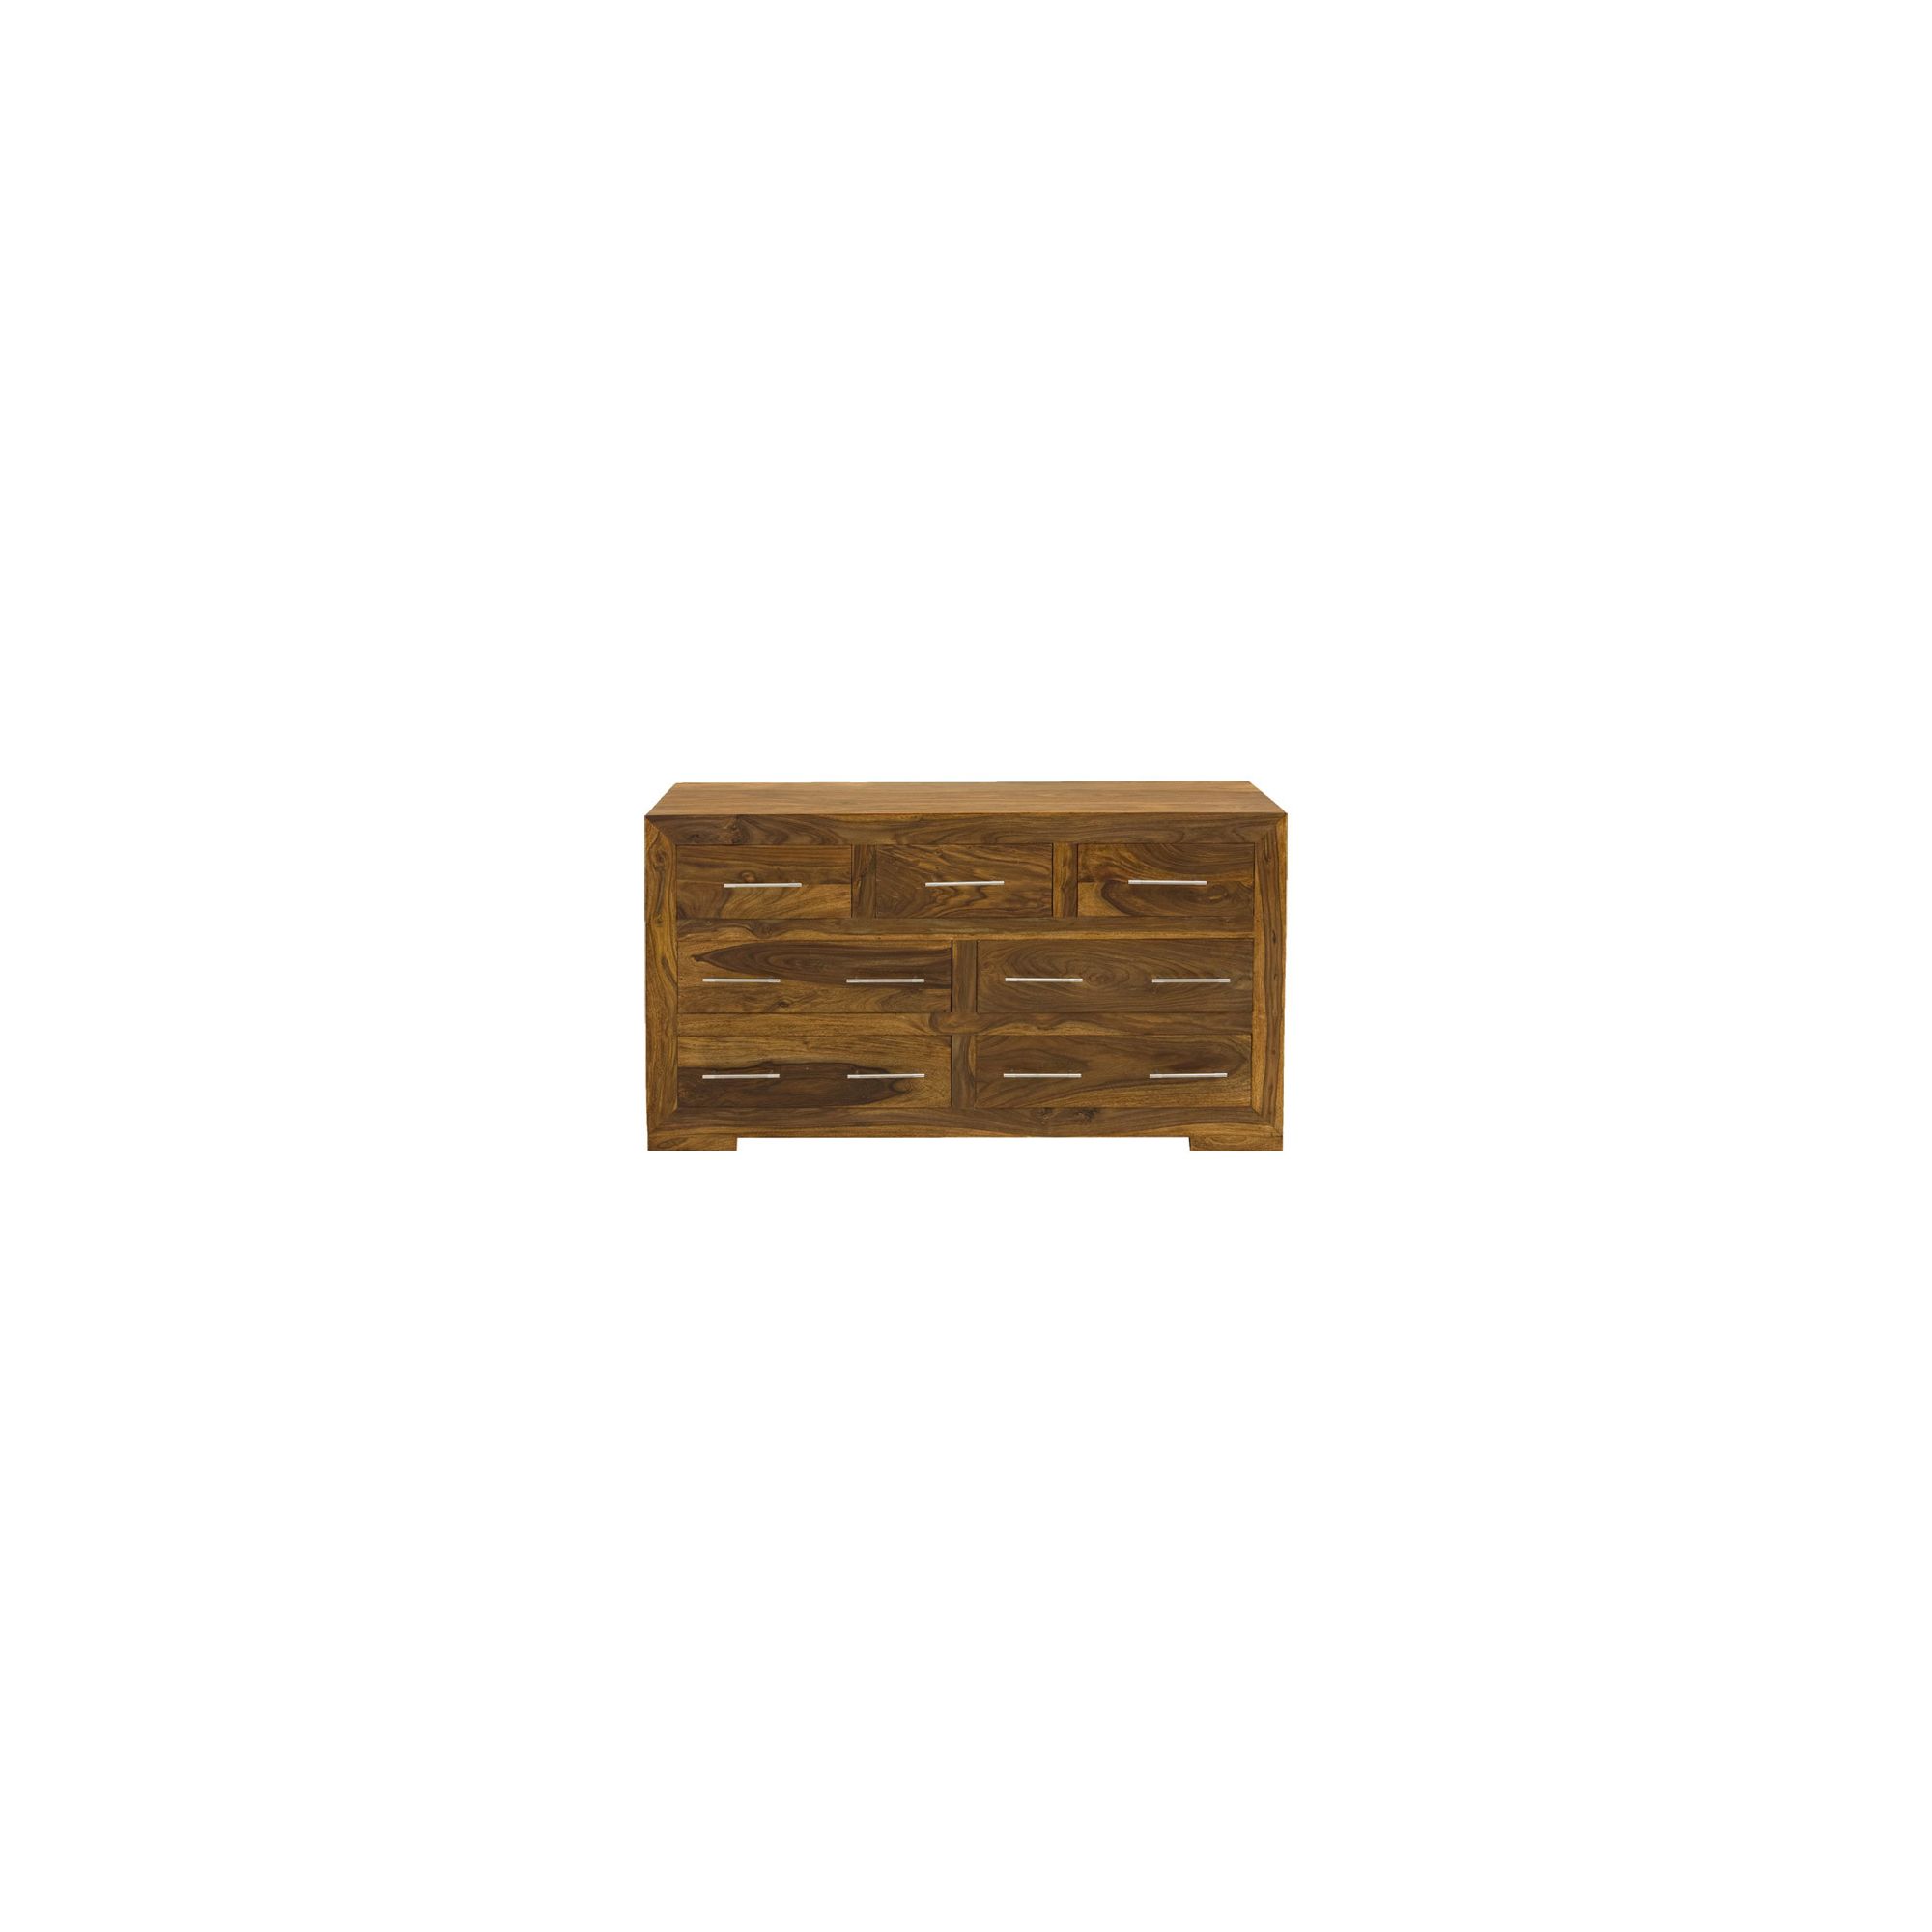 Elements Cubex Bedroom Seven Drawer Chest in Warm Lacquer at Tesco Direct